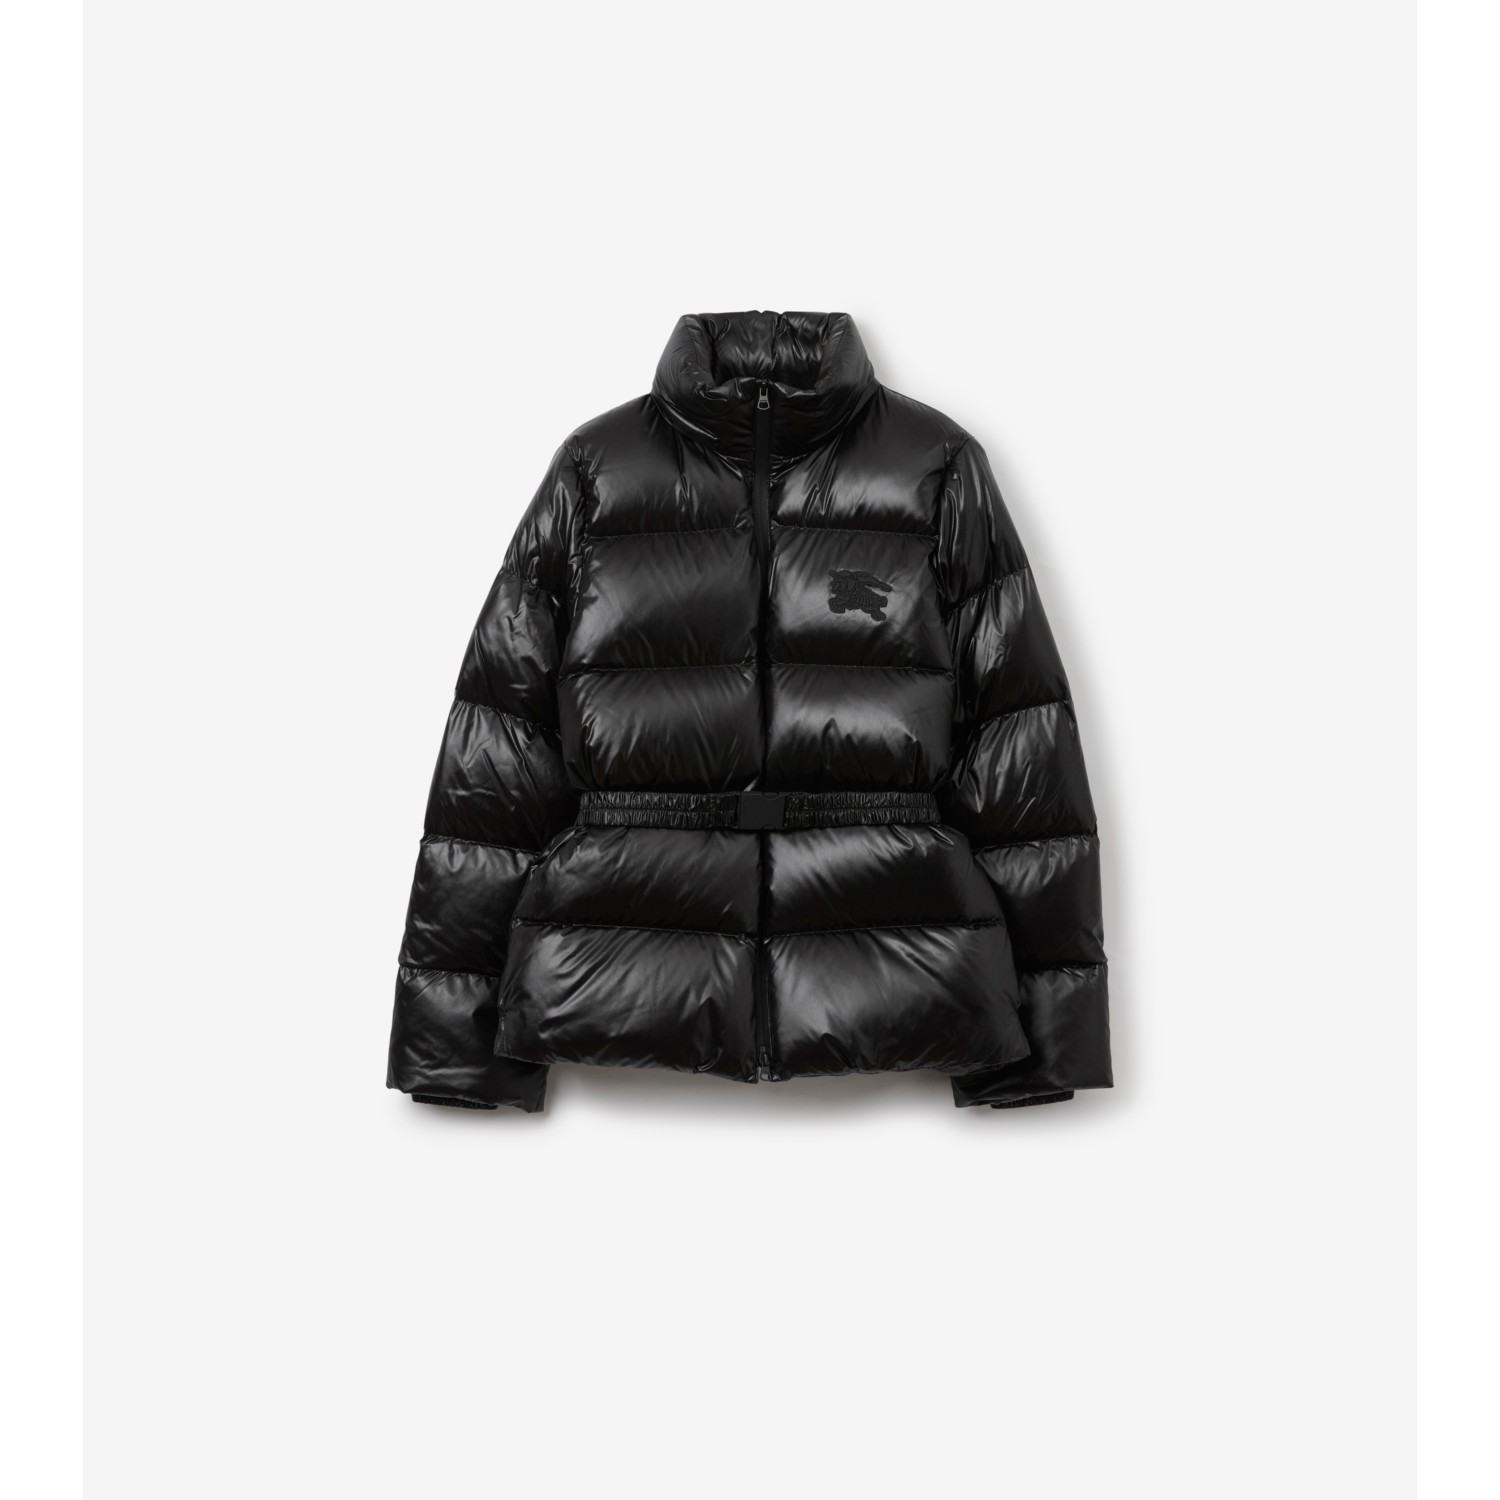 Unlock Wilderness' choice in the Burberry Vs Canada Goose comparison, the Nylon Puffer Jacket by Burberry